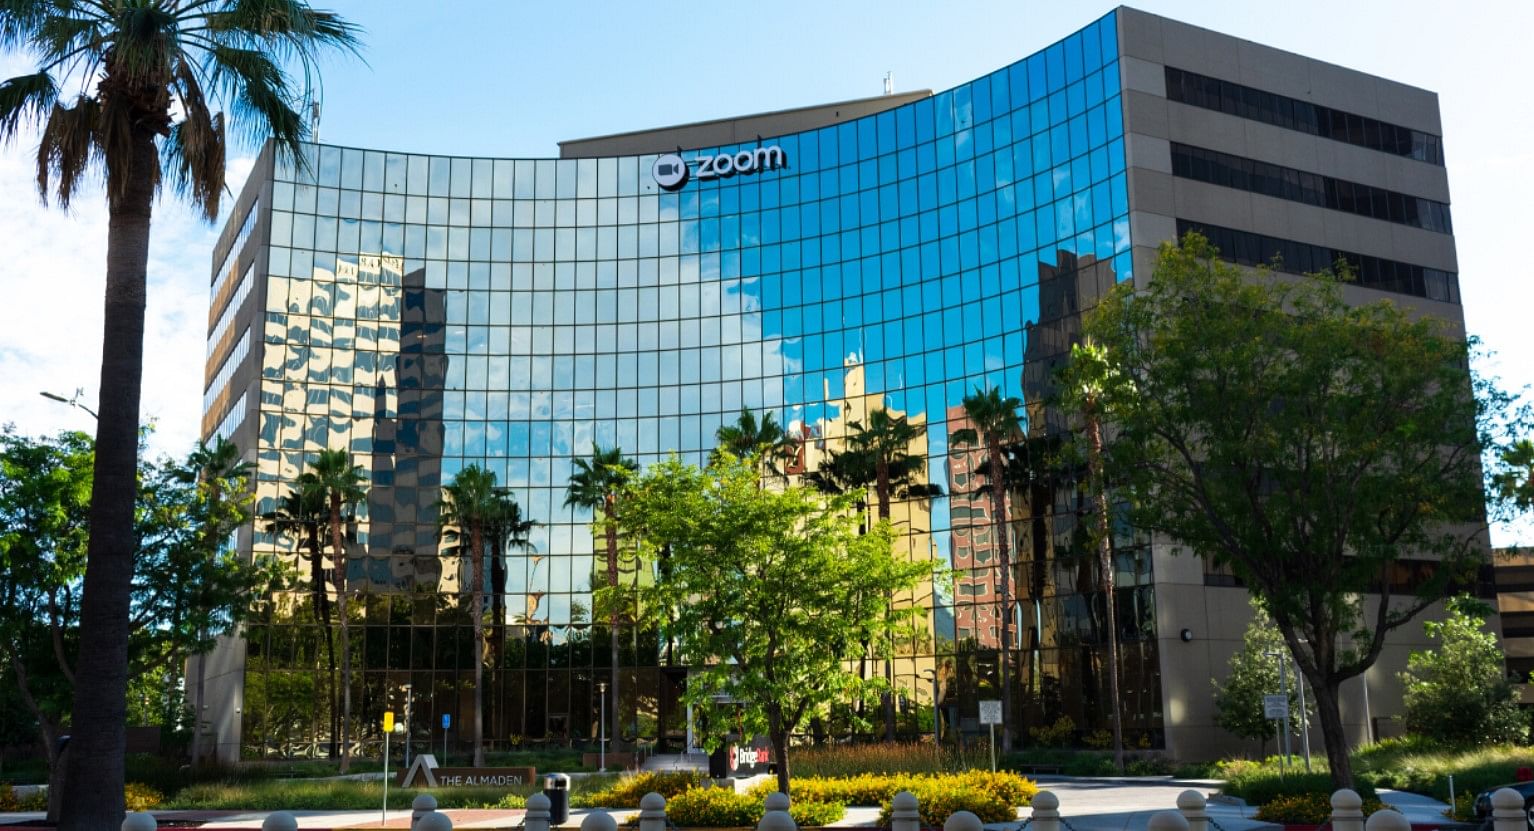 Zoom office building. Picture credit: Official Zoom Blog